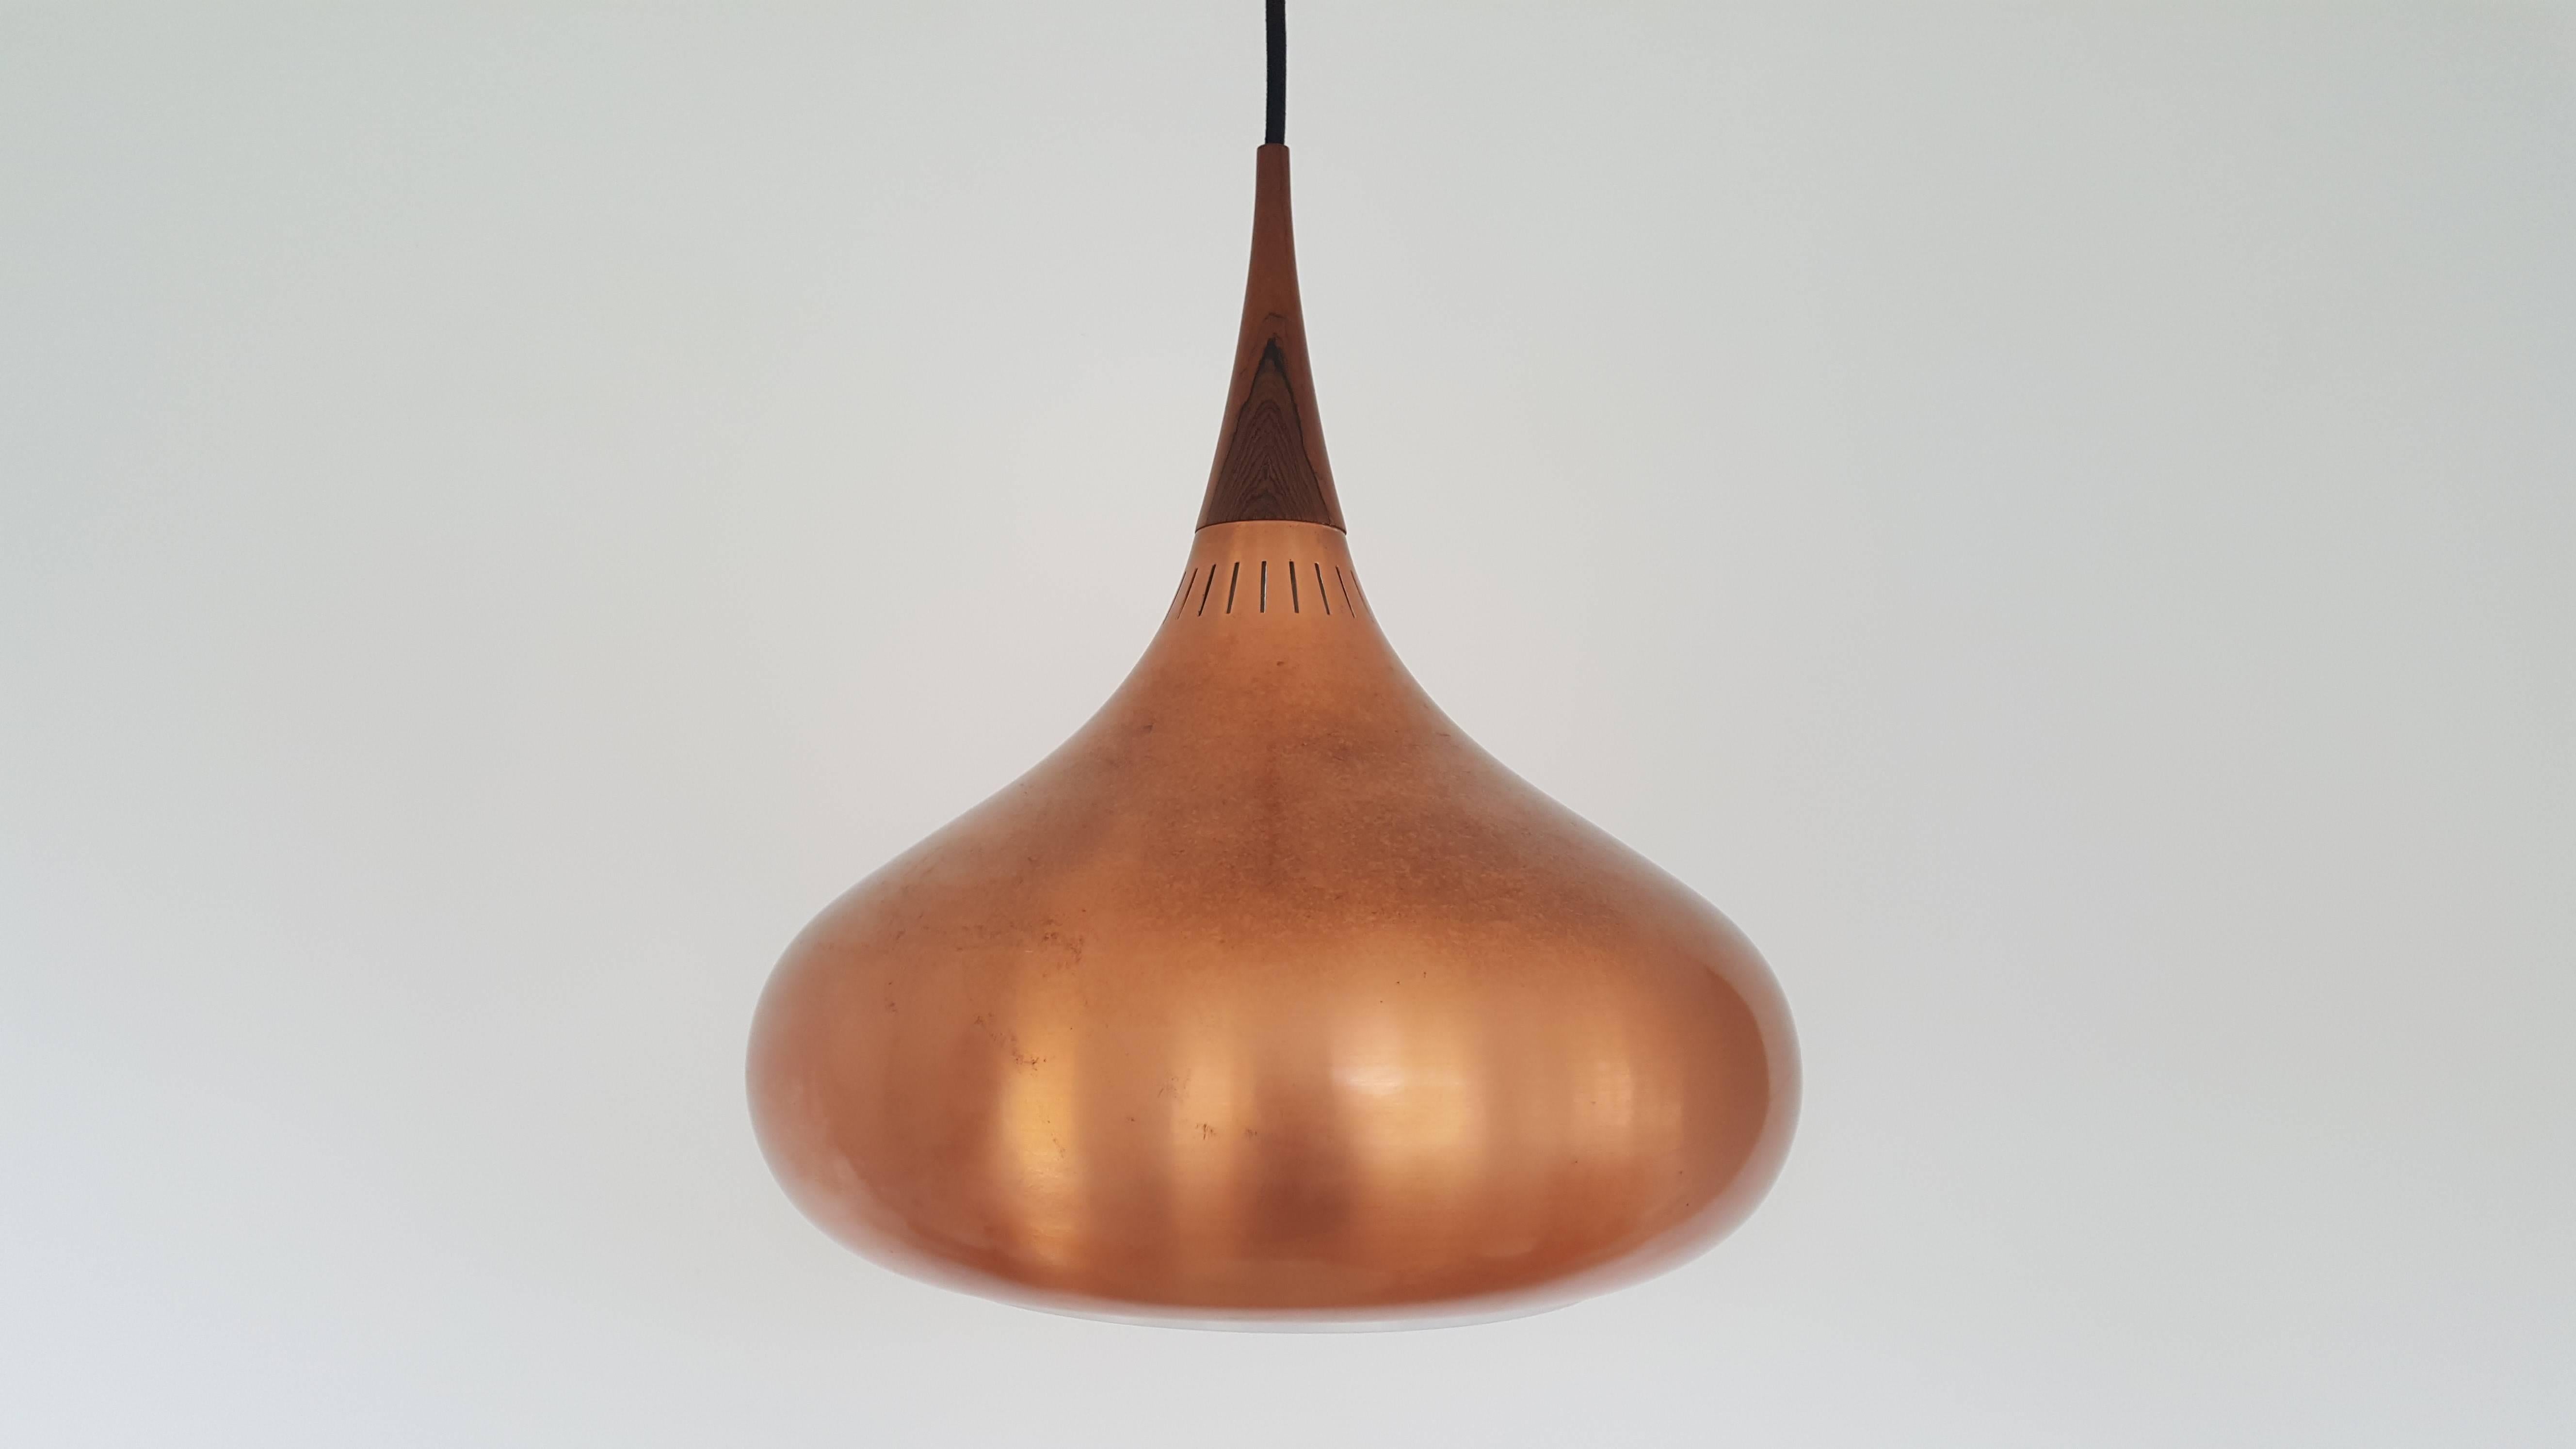 Jo Hammerborg large copper Orient pendant light for Fog & Mørup, 1960s.

Beautiful copper and rosewood orient pendant lamp. Designed by Jo Hammerborg for Fog and Mørup and released in the 1960s.

In 1957 Hammerborg became head of design at Fog &